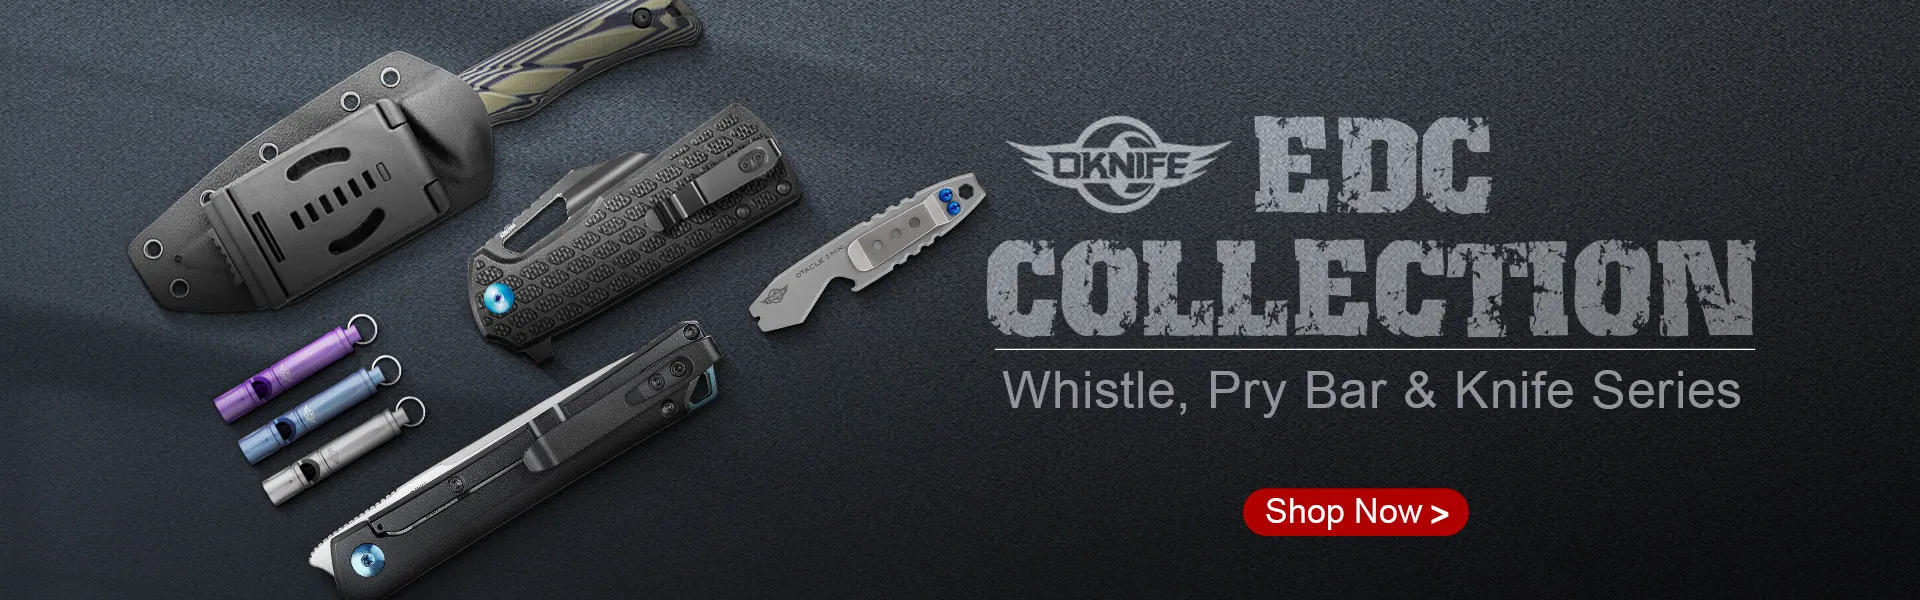 Oknife - EDC Collection: Whistle, Pry Bar & Knife Series